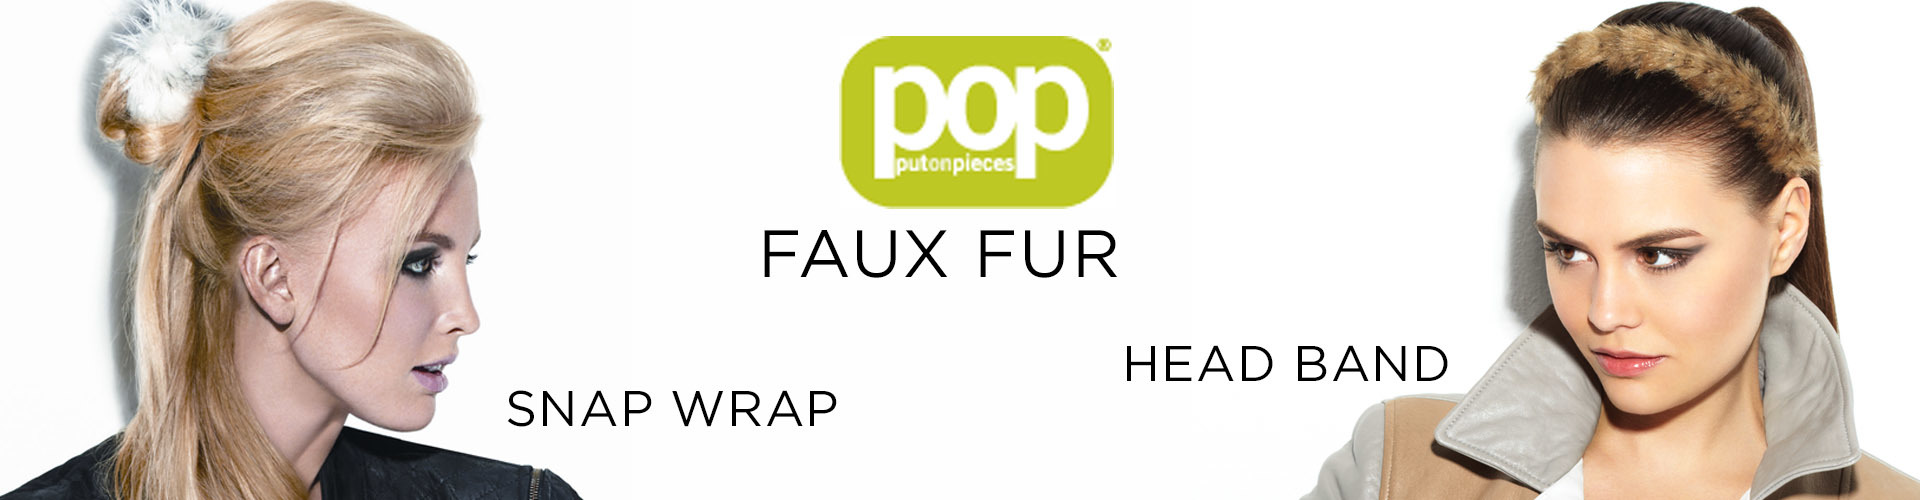 Faux fur Head Band and Snap Wrap (© Great Lengths)